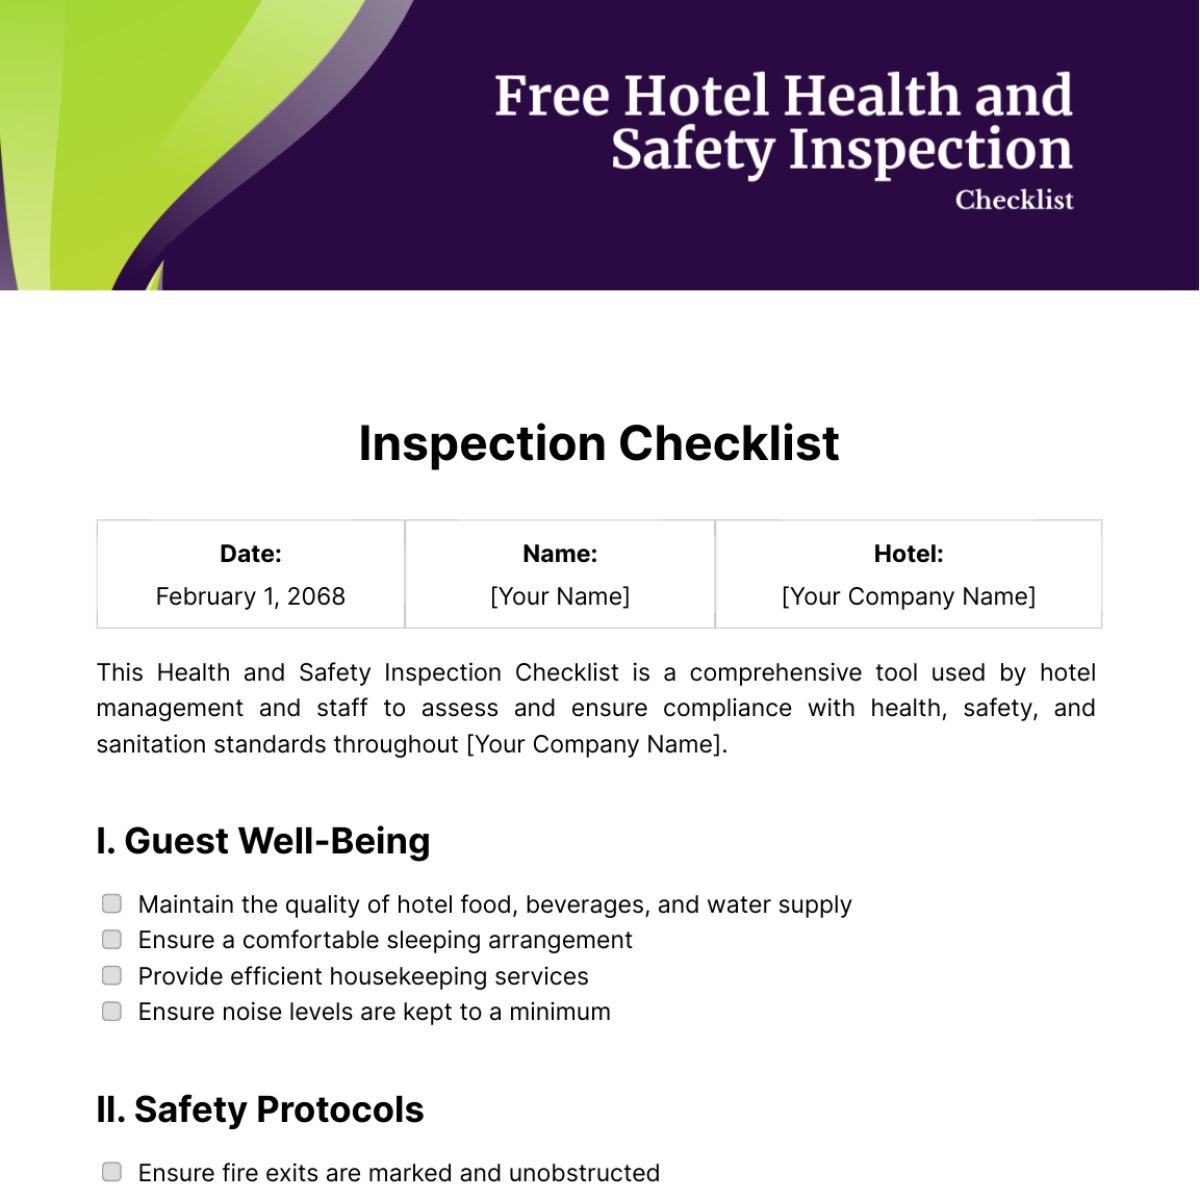 Hotel Health and Safety Inspection Checklist Template